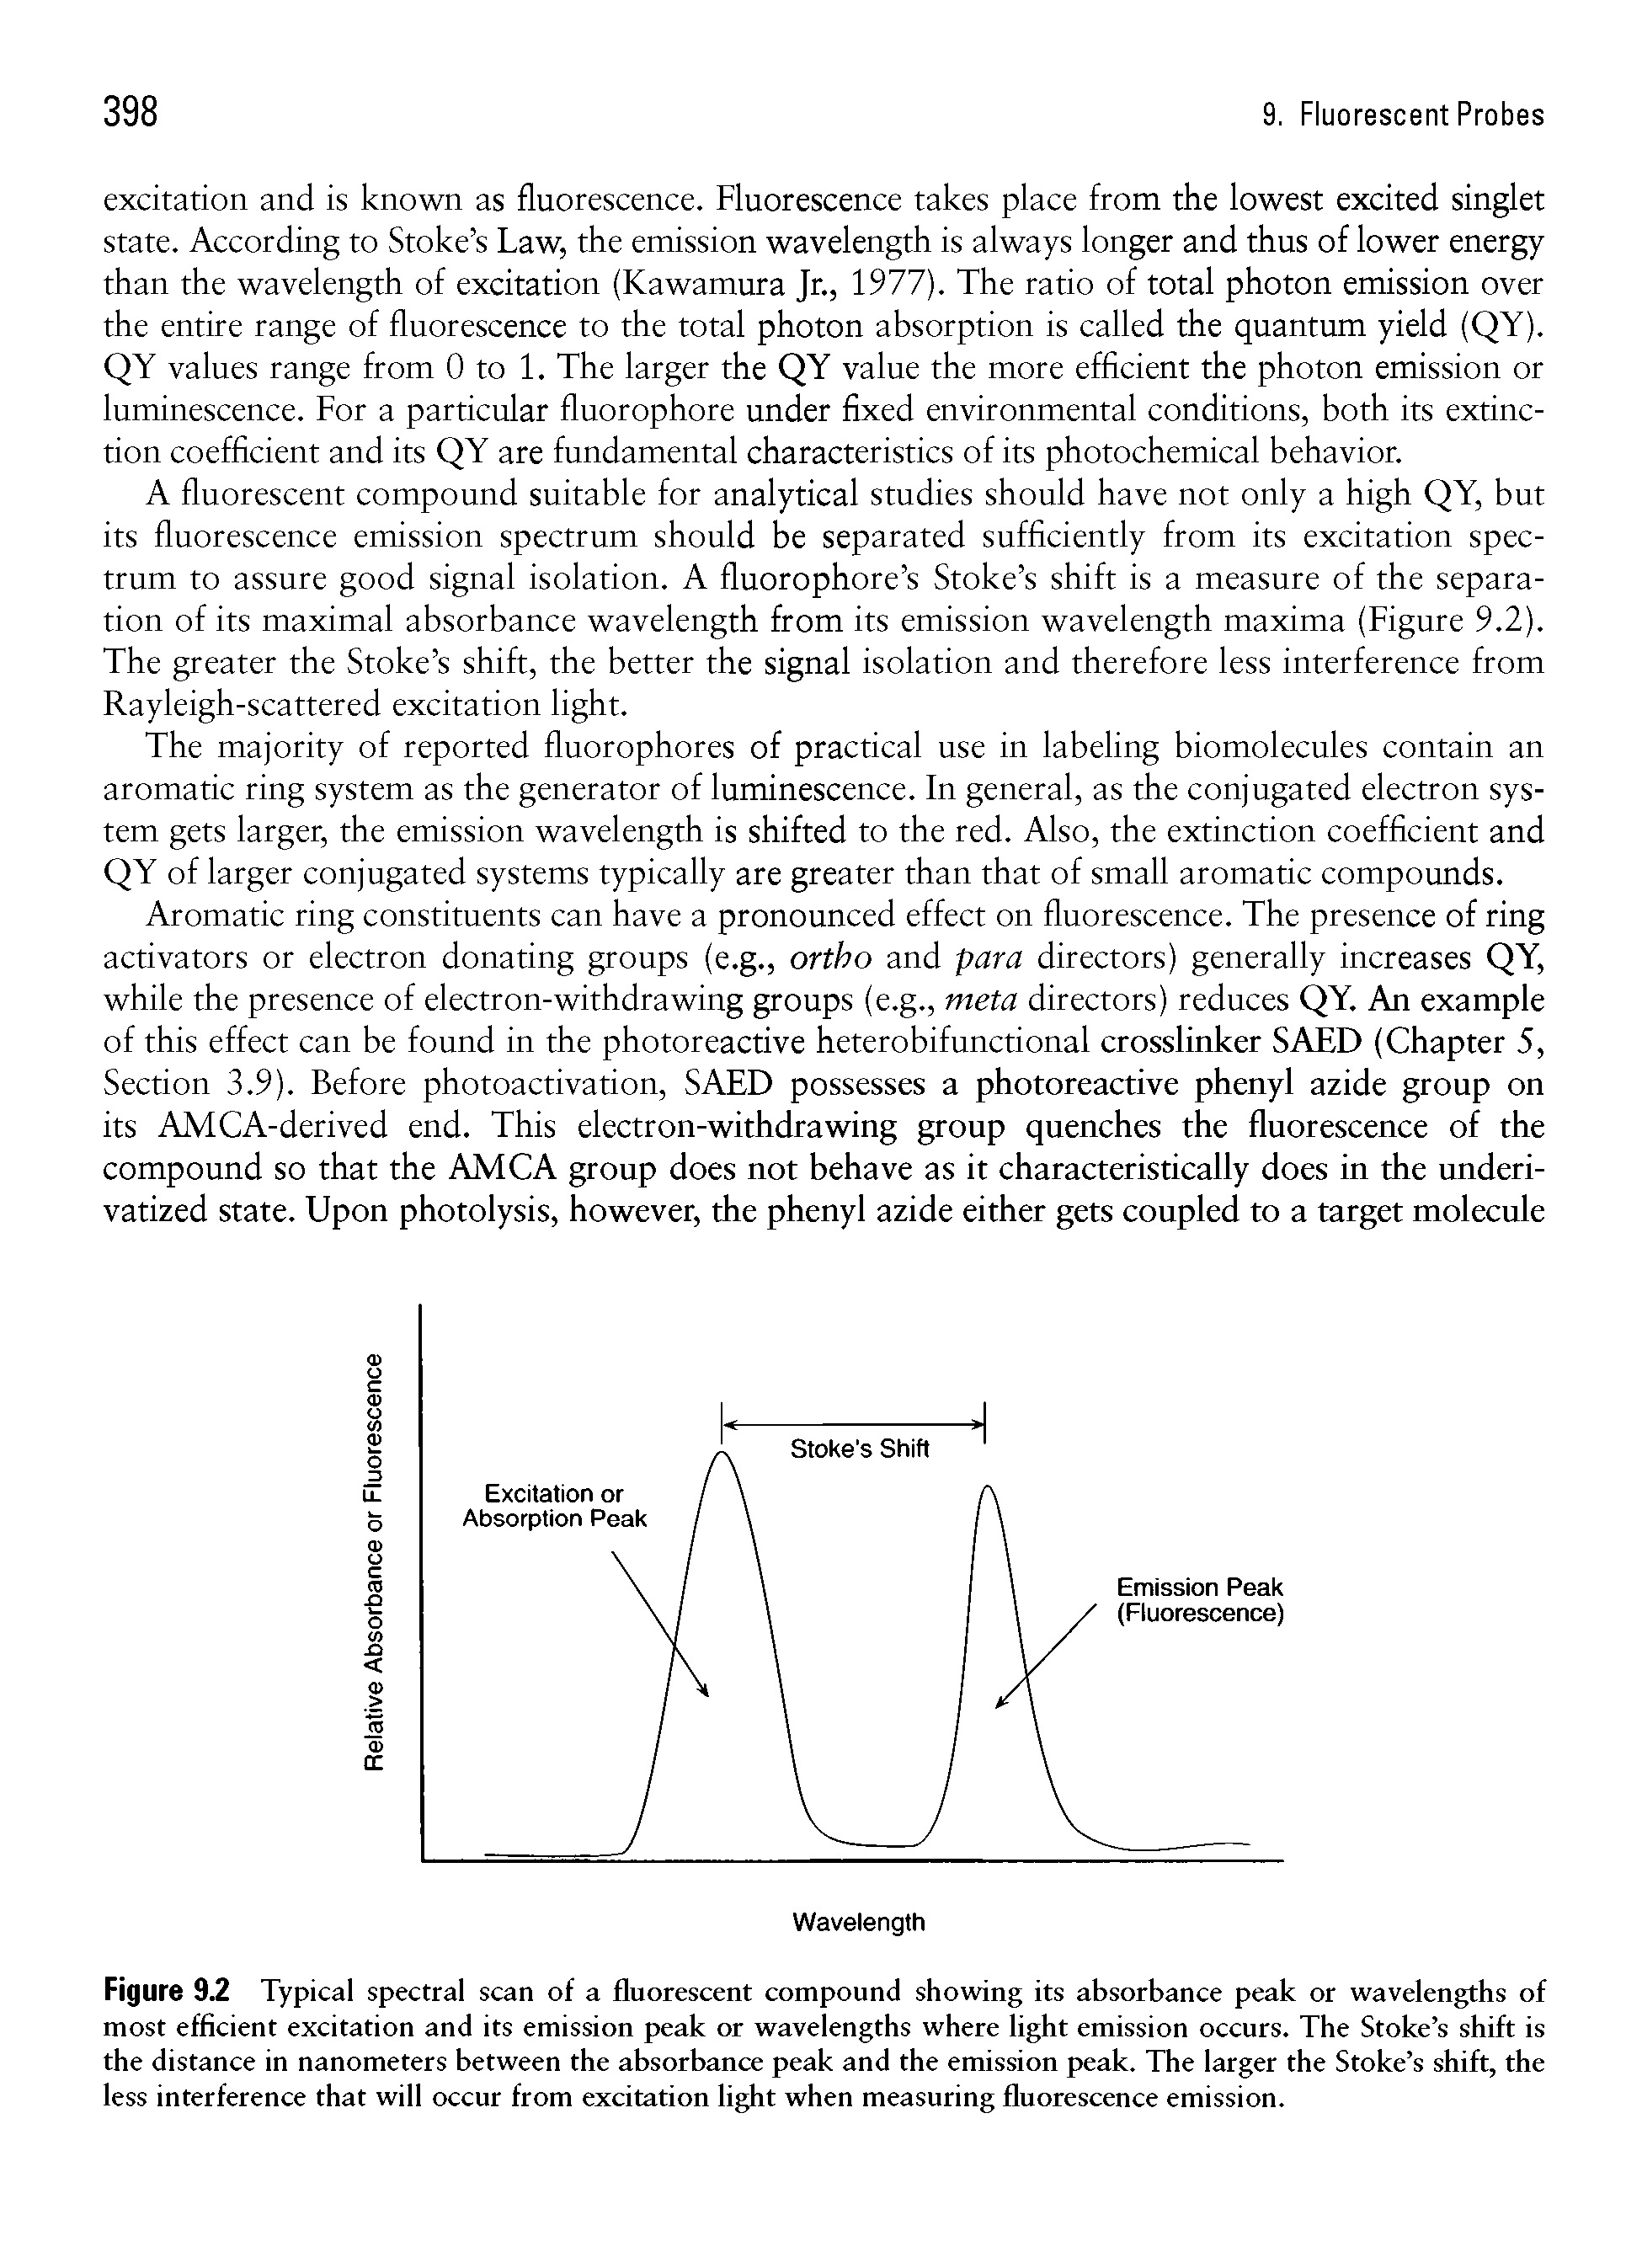 Figure 9.2 Typical spectral scan of a fluorescent compound showing its absorbance peak or wavelengths of most efficient excitation and its emission peak or wavelengths where light emission occurs. The Stoke s shift is the distance in nanometers between the absorbance peak and the emission peak. The larger the Stoke s shift, the less interference that will occur from excitation light when measuring fluorescence emission.